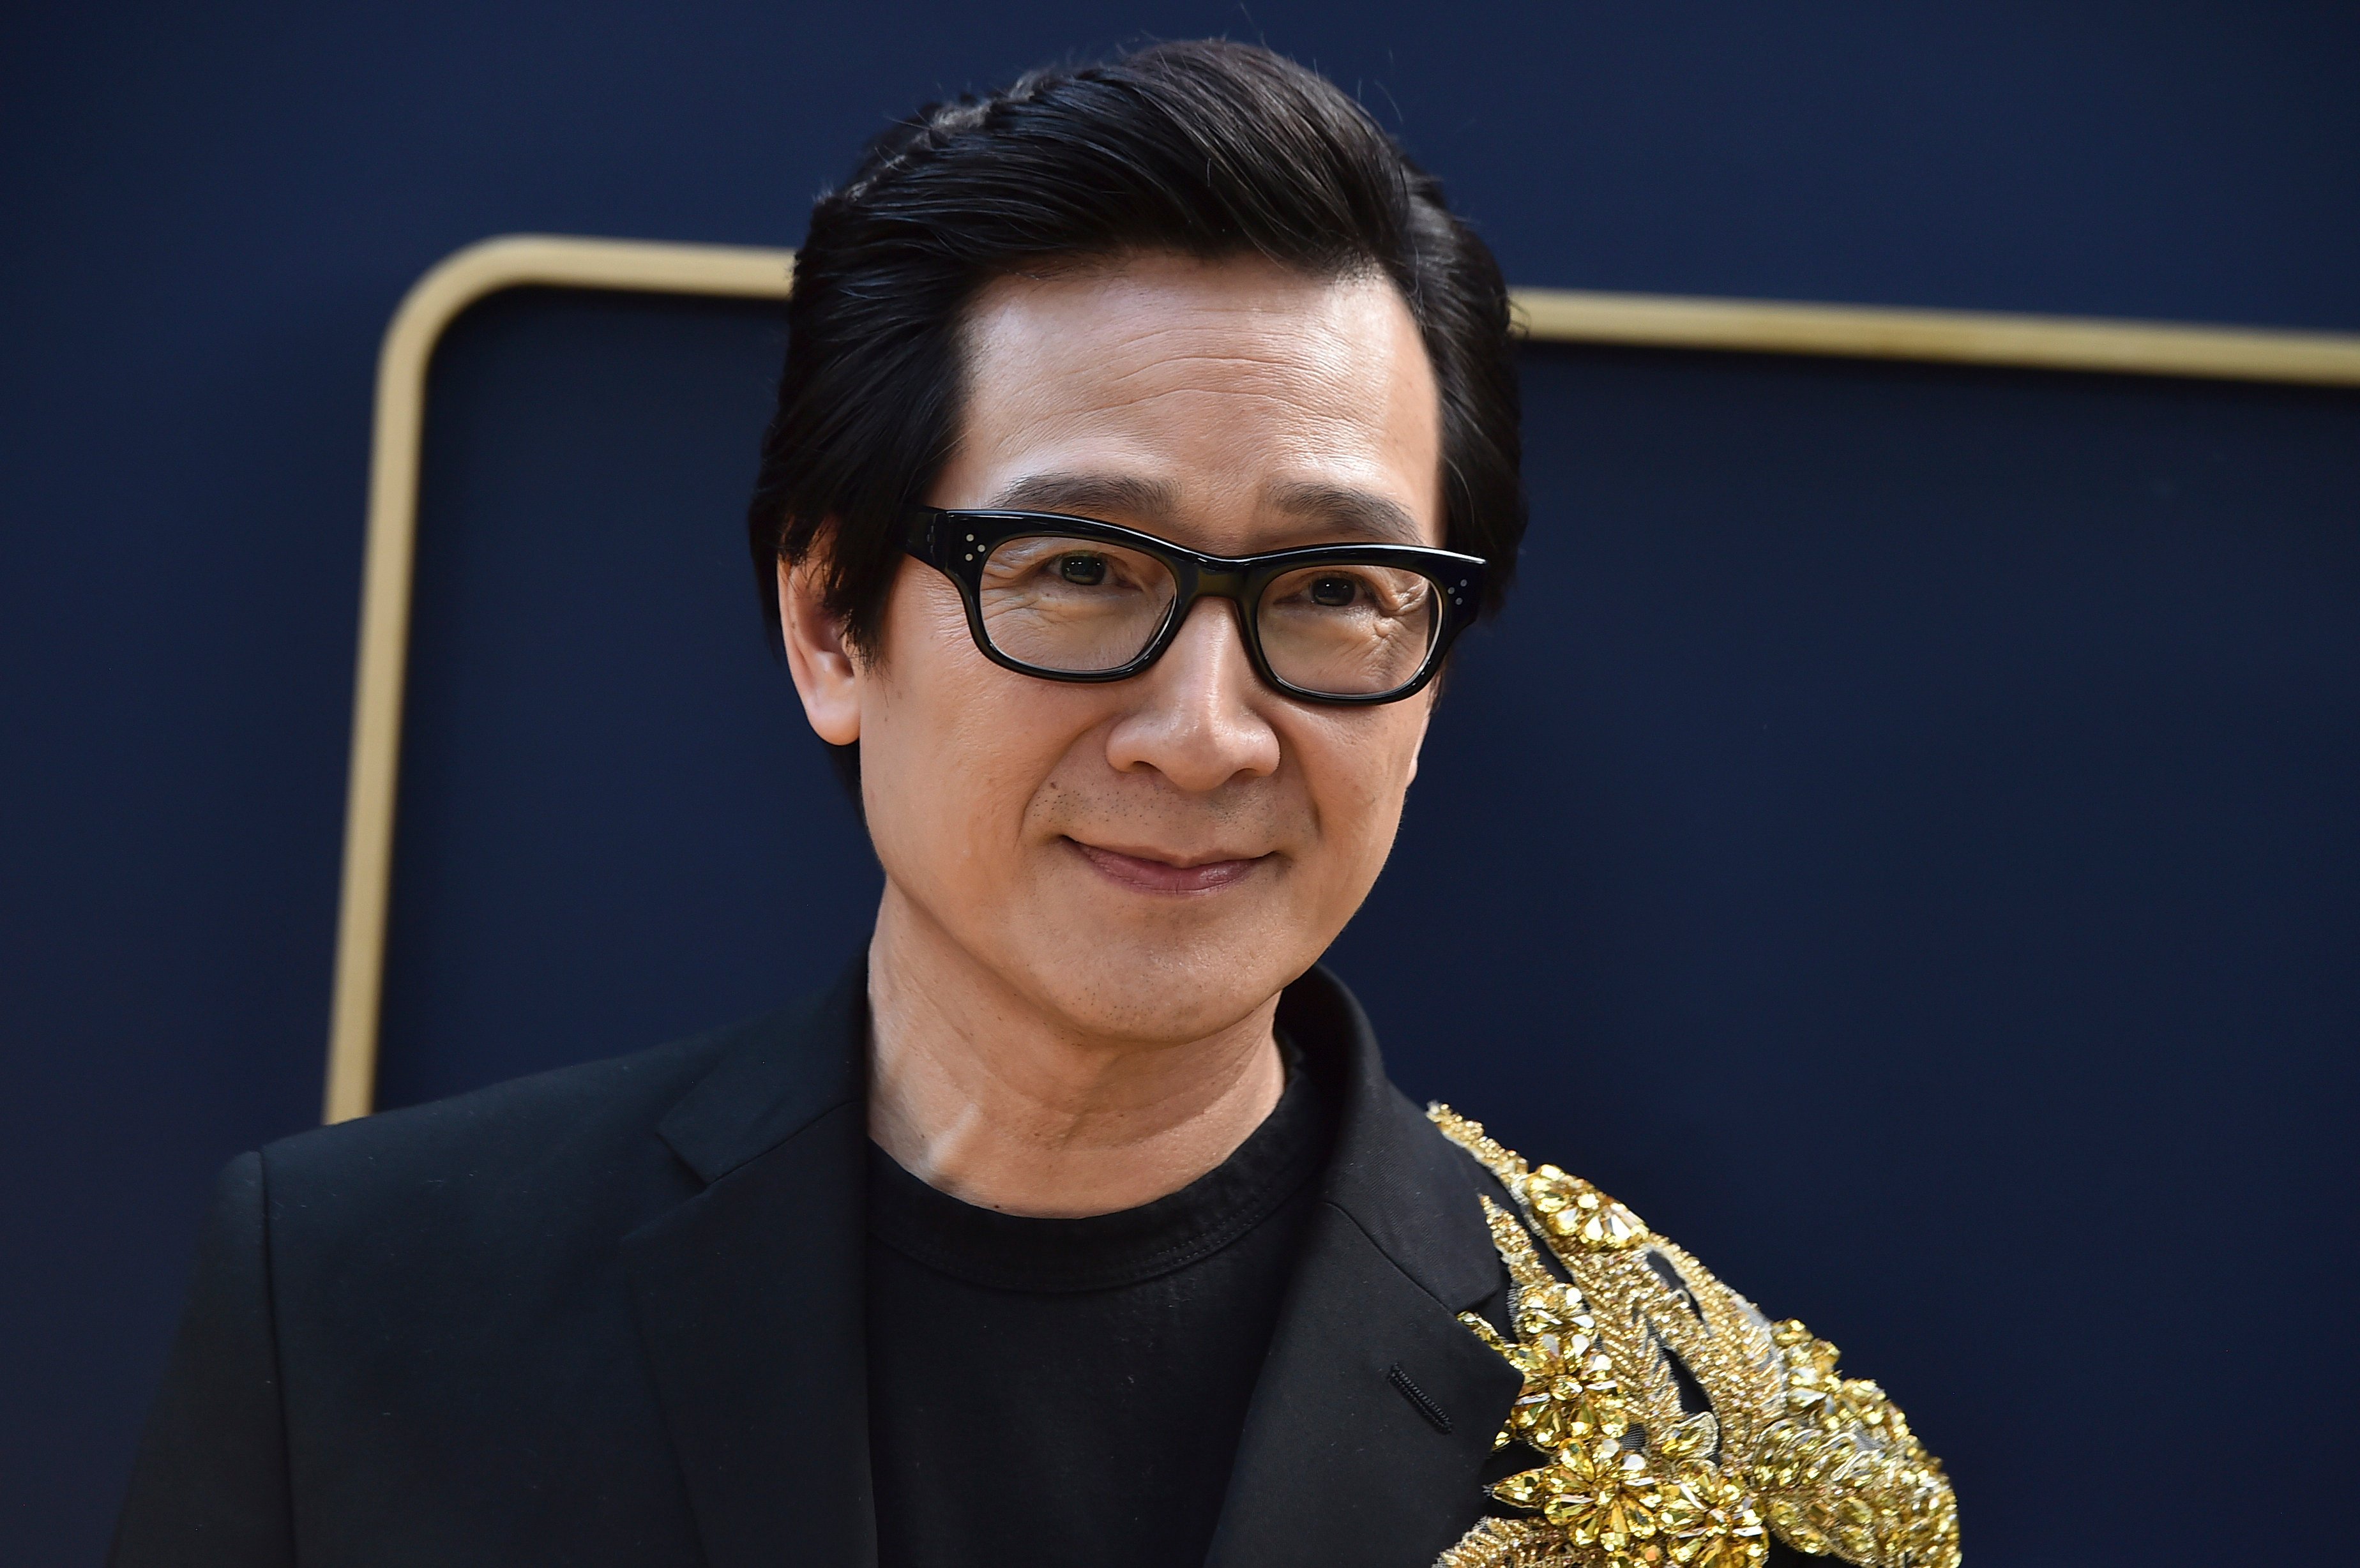 Ke Huy Quan arrives at the Gold House Gala on May 21, in Los Angeles. Photo: Invision/AP